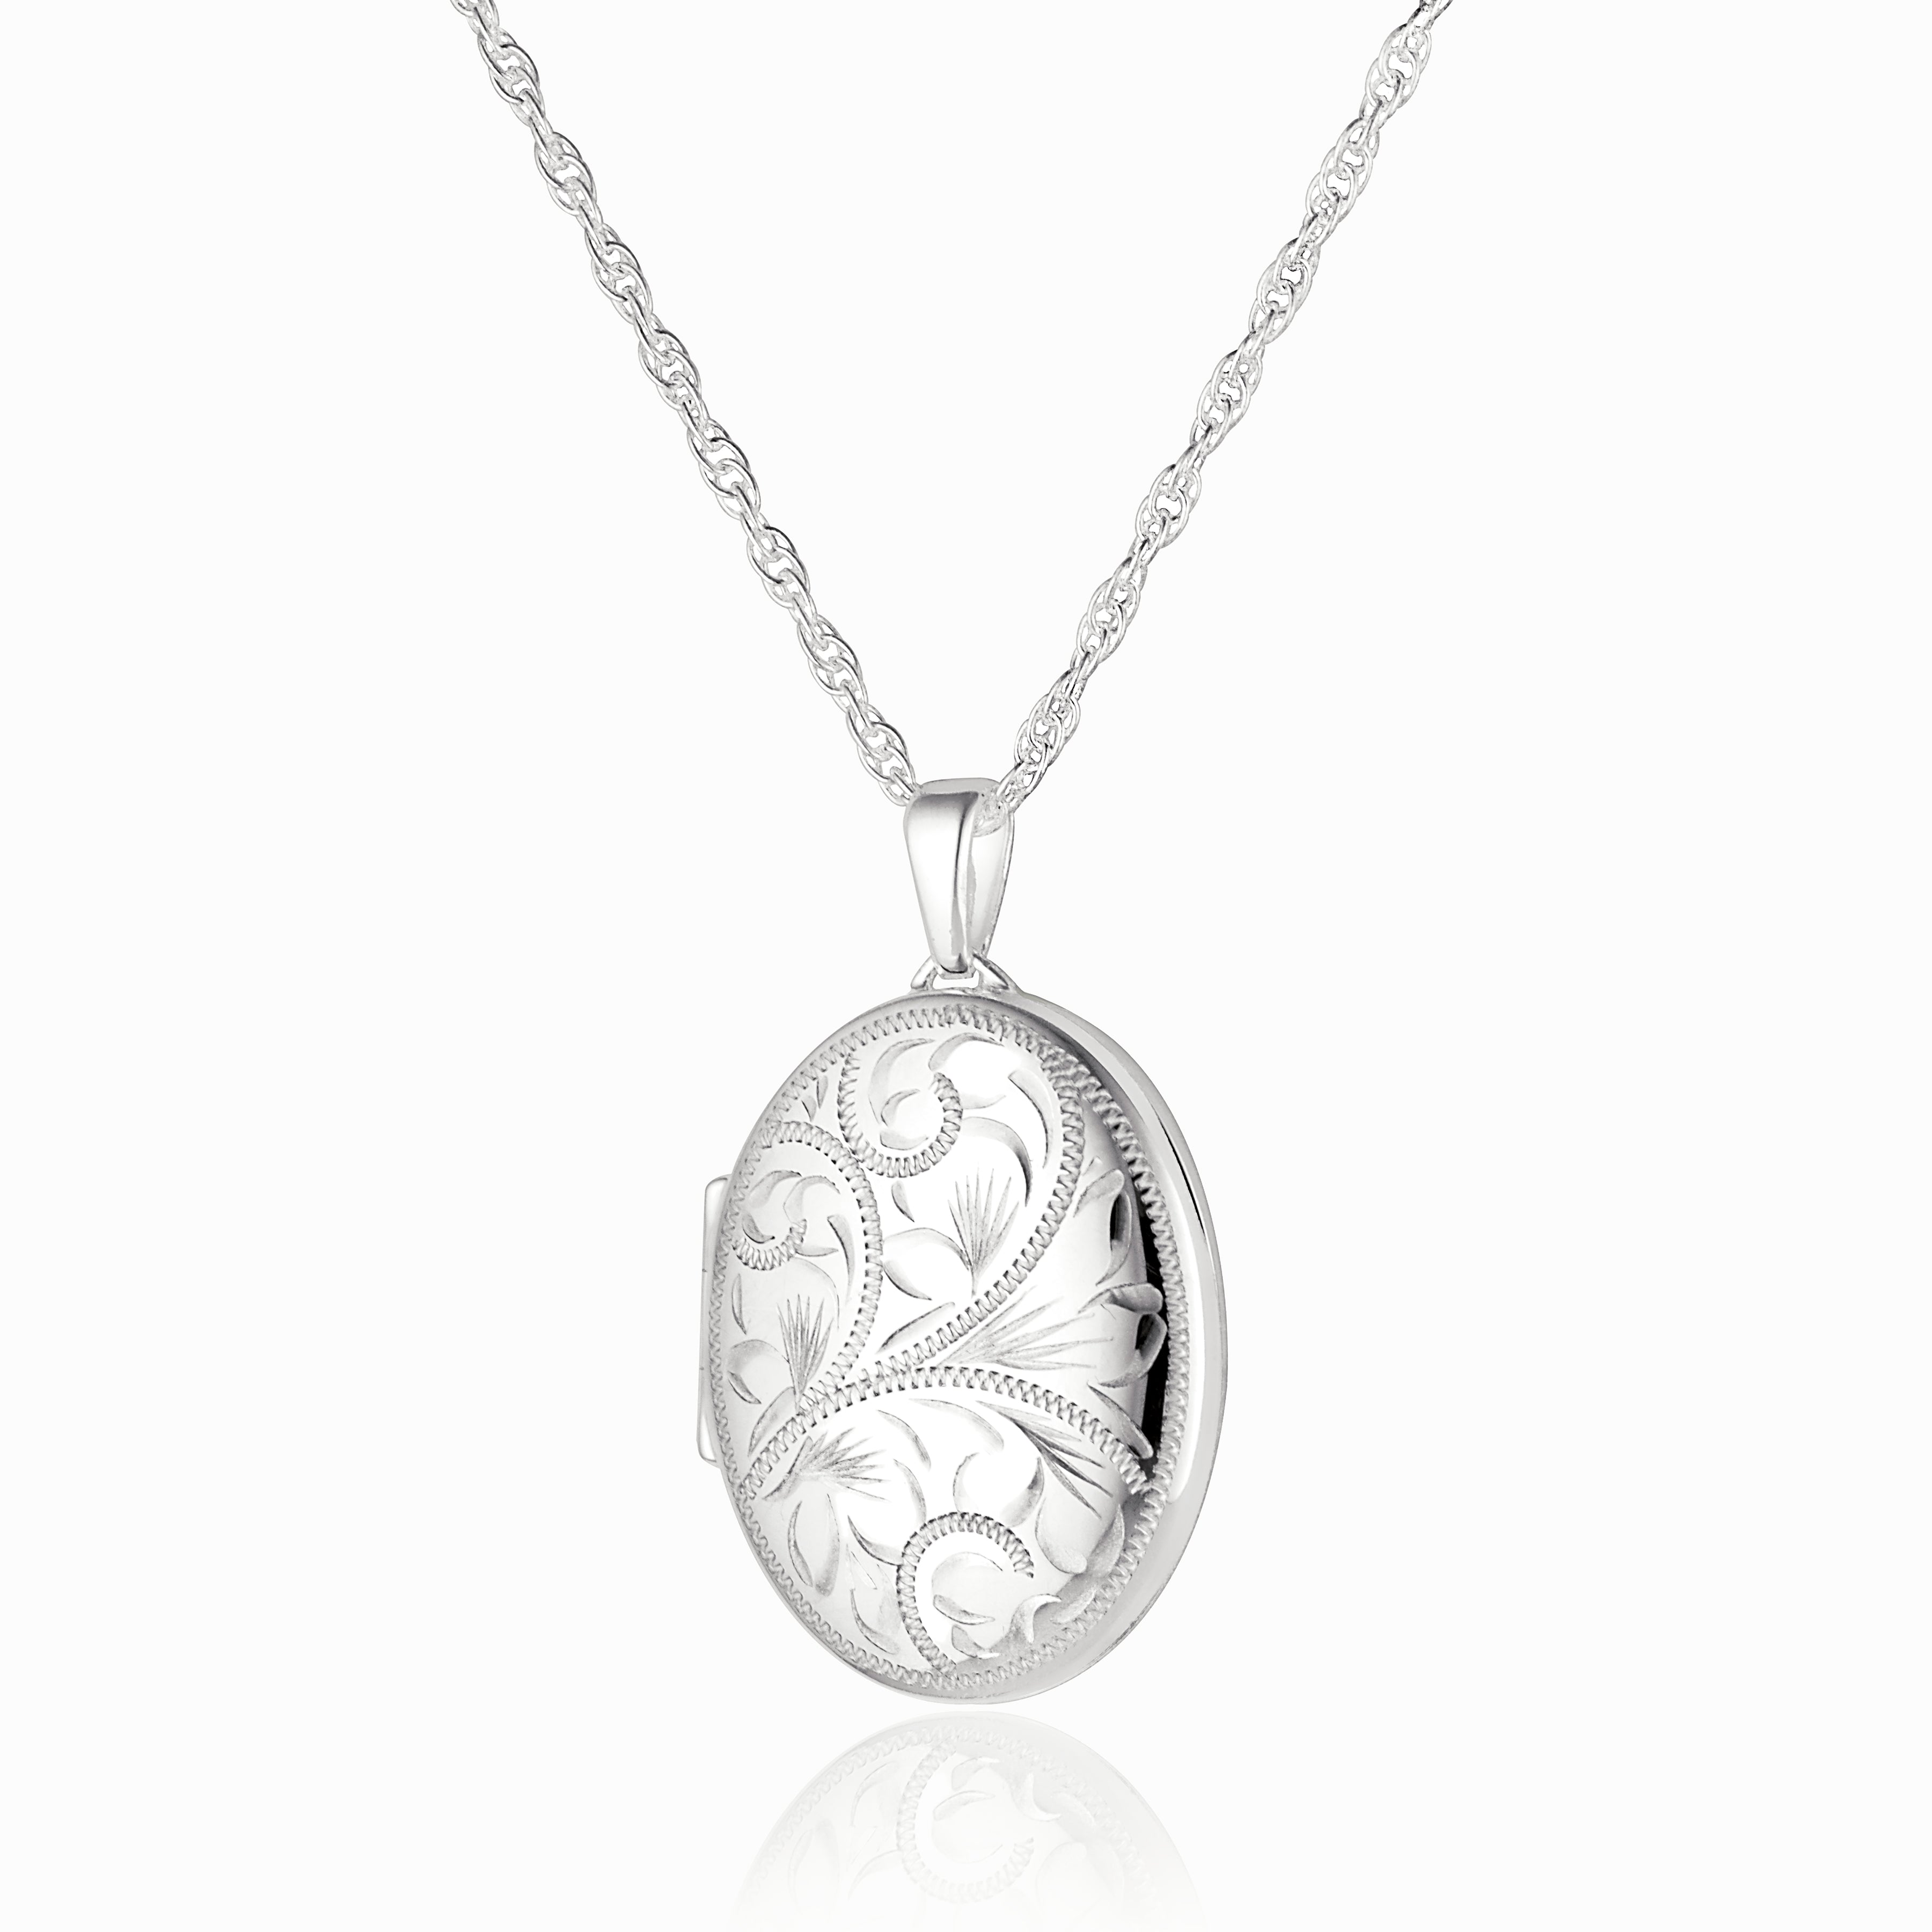 Product title: Victorian Oval Locket, product type: Necklaces